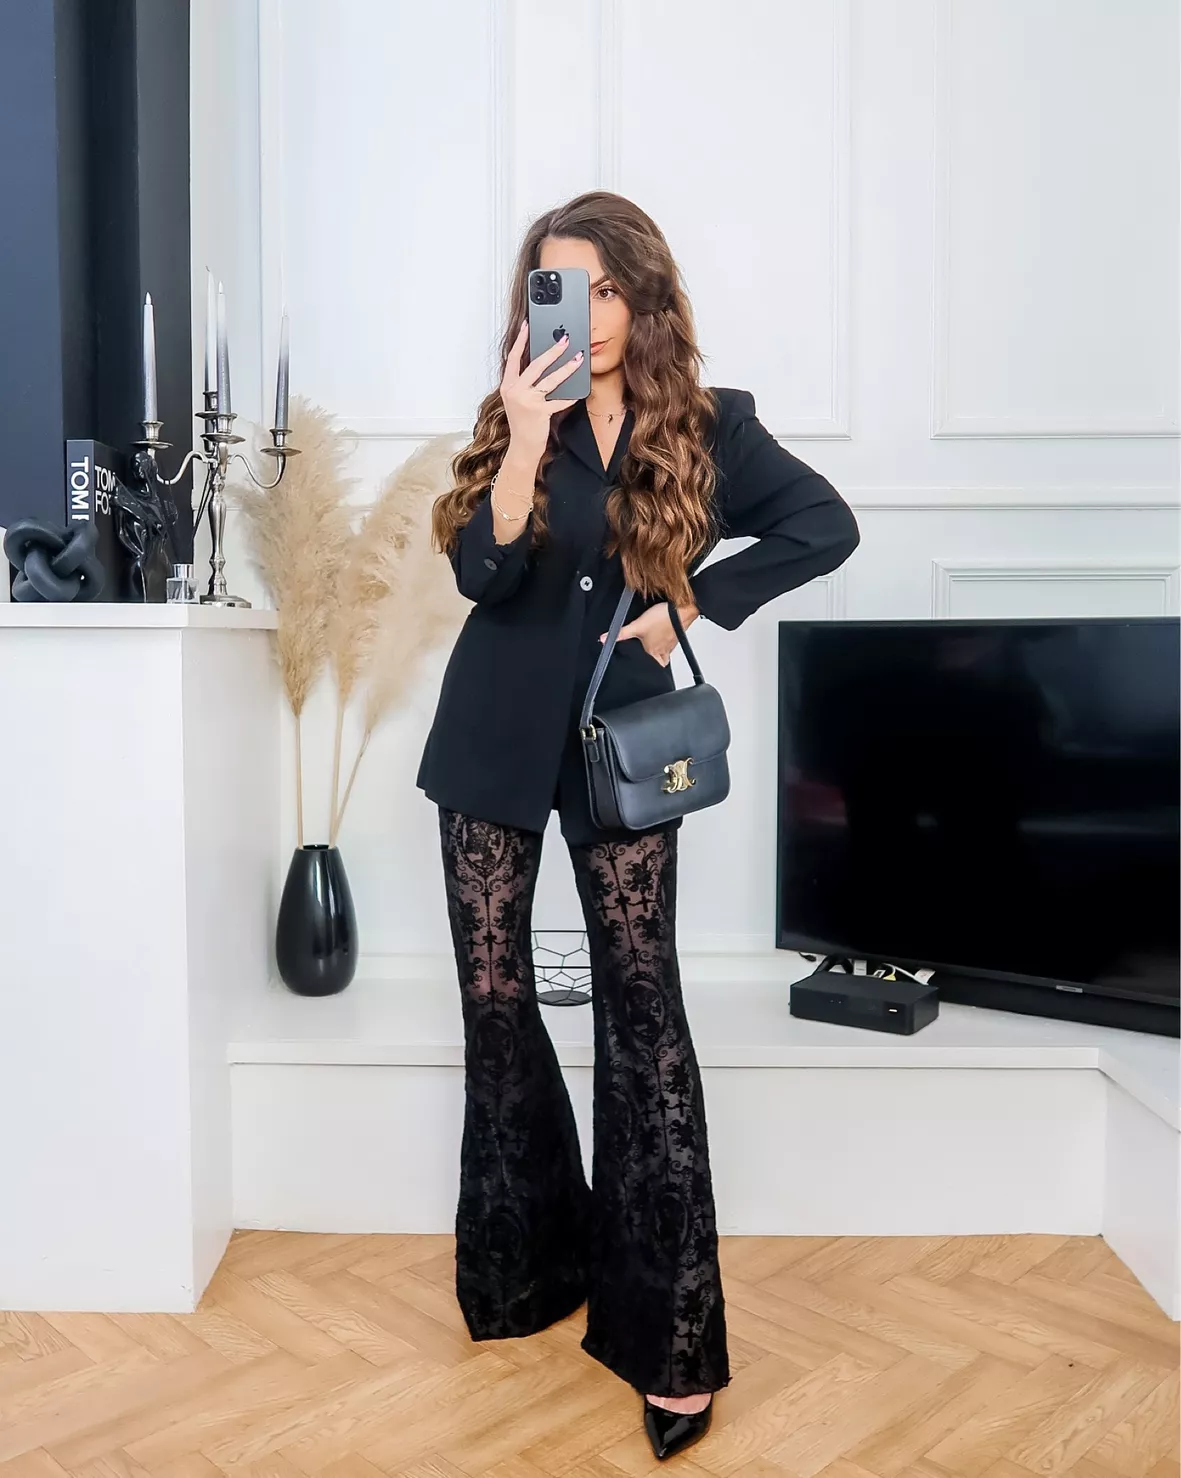 Velvet Flare Pants Outfits (2 ideas & outfits)